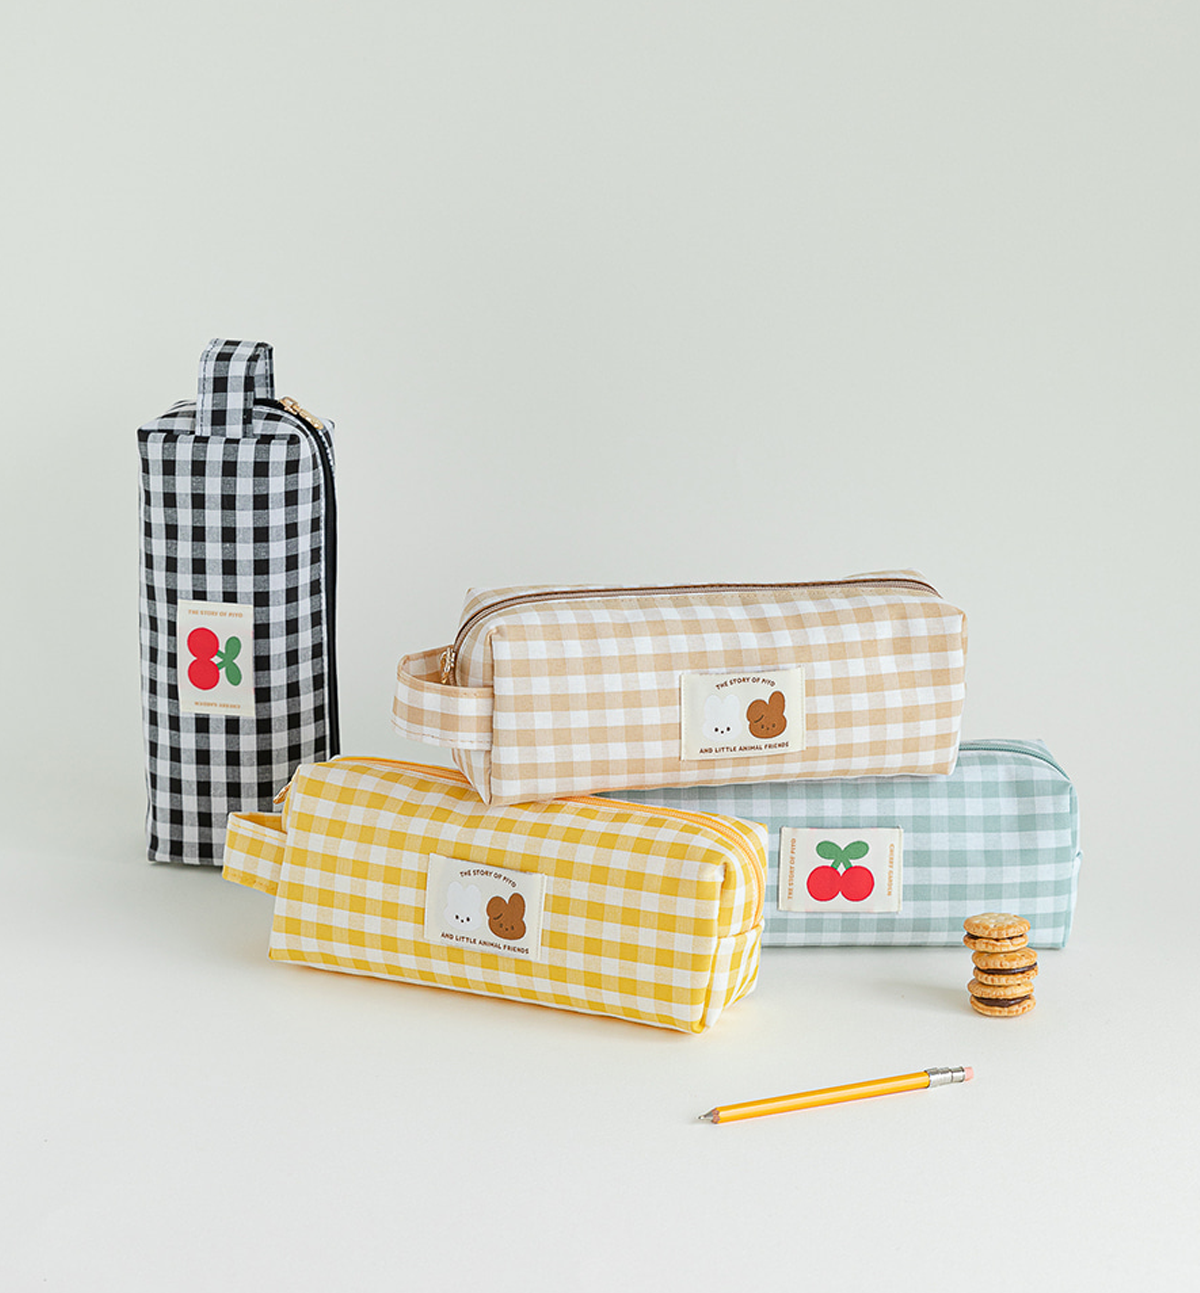 Piyo Coated Pencil Pouch